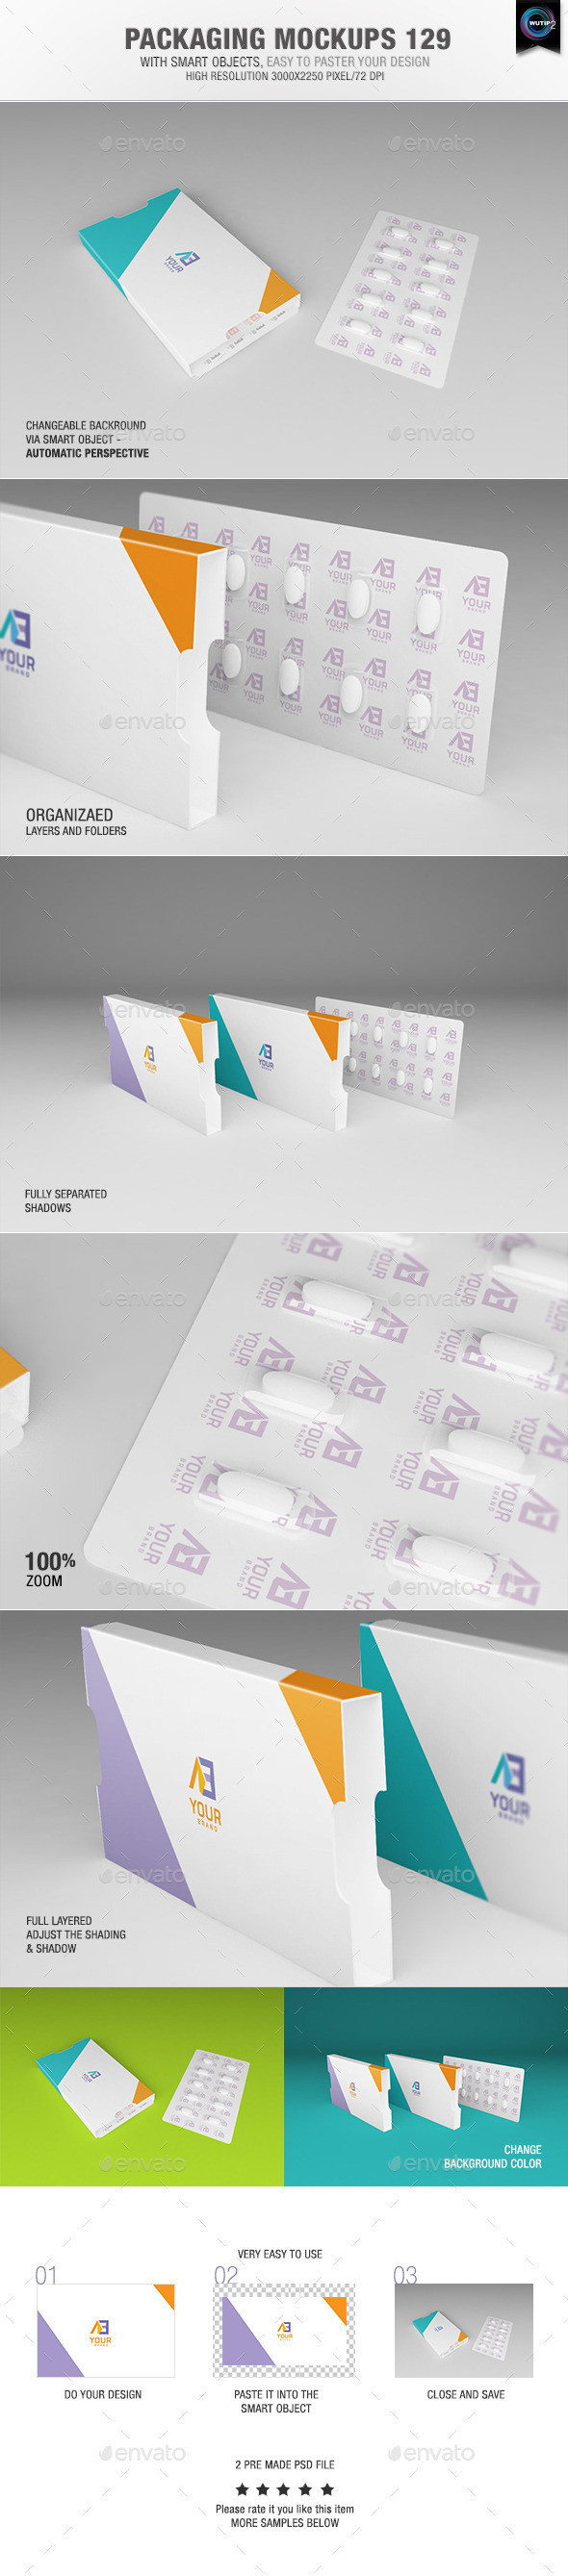 Packaging 20mockups 20129 20preview